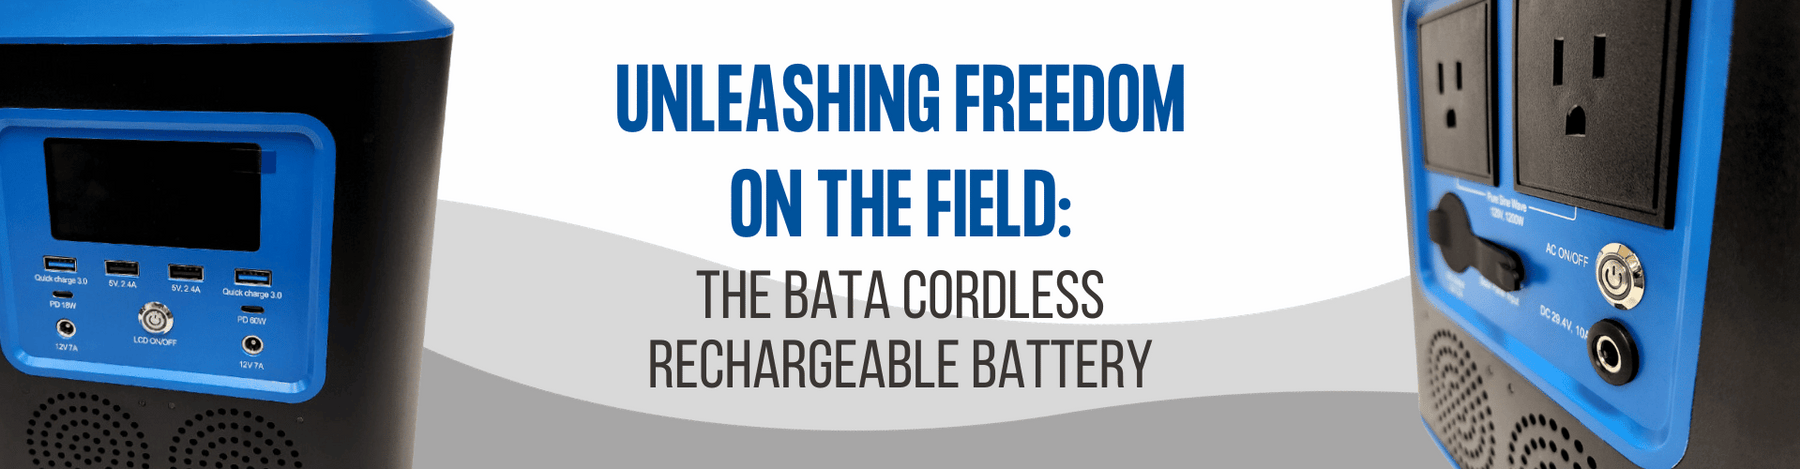 Unleashing Freedom on the Field: The BATA Cordless Rechargeable Battery Revolutionizing Baseball Practice